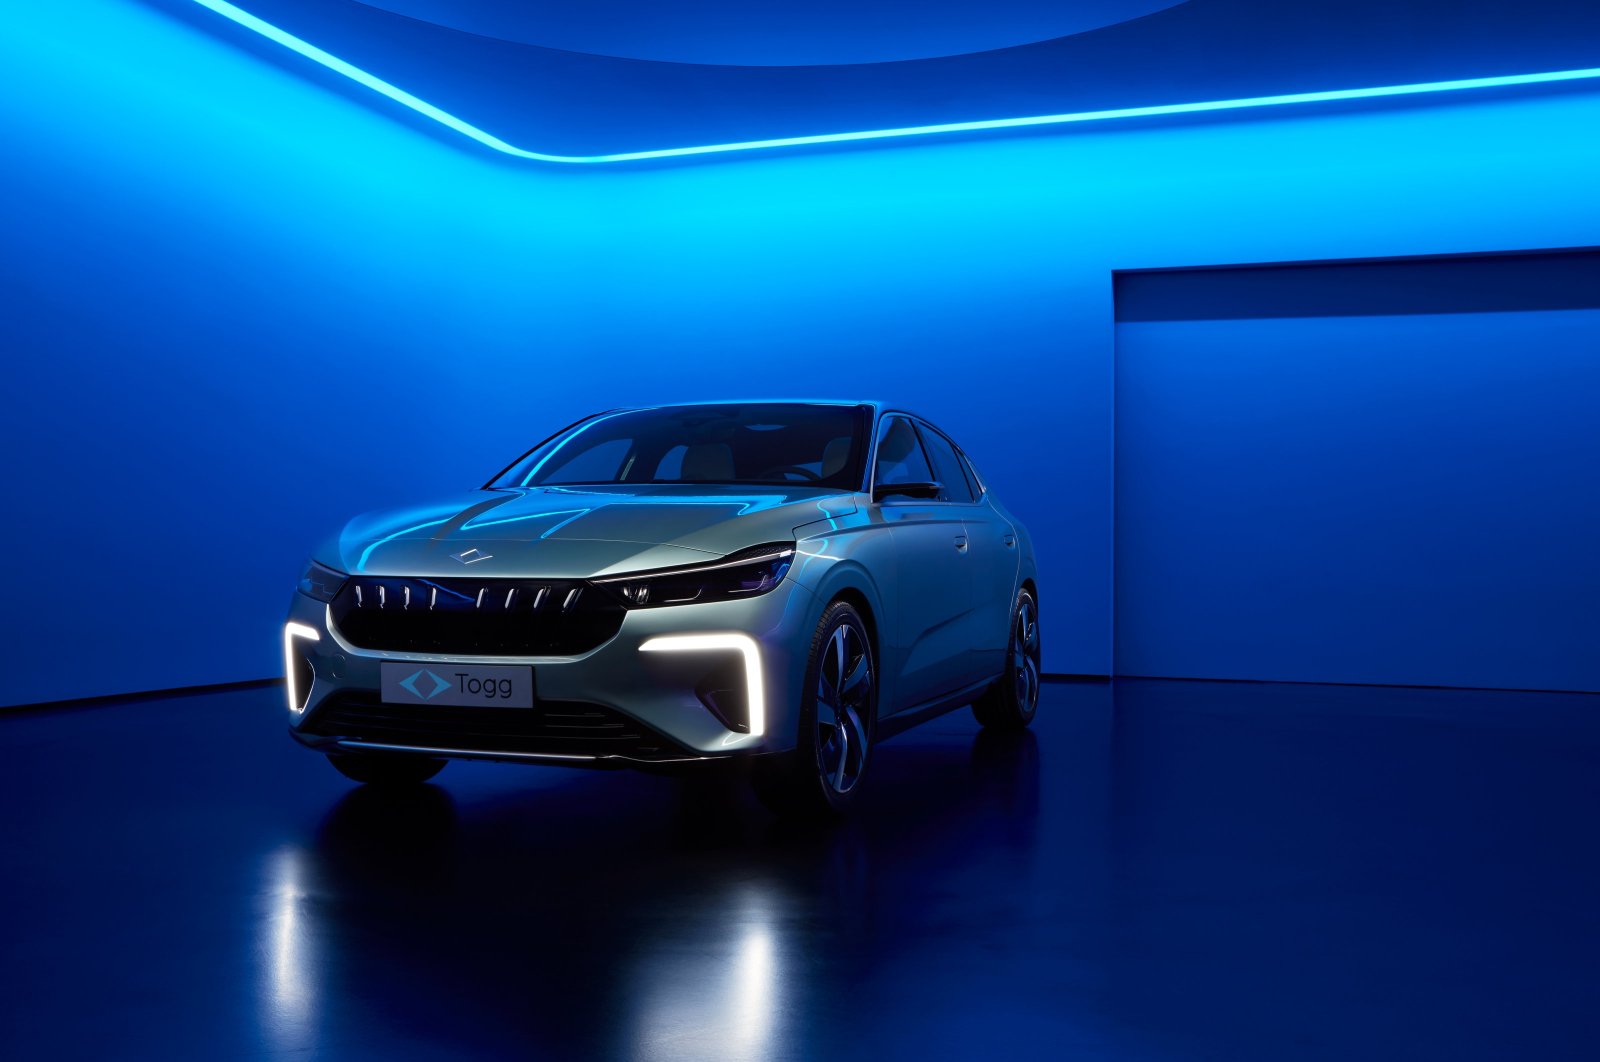 The Togg T10F, the new model of Türkiye&#039;s first domestic car brand Togg unveiled during the Consumer Electronics Show (CES) in Las Vegas, U.S., Jan. 9, 2024. (AA Photo)